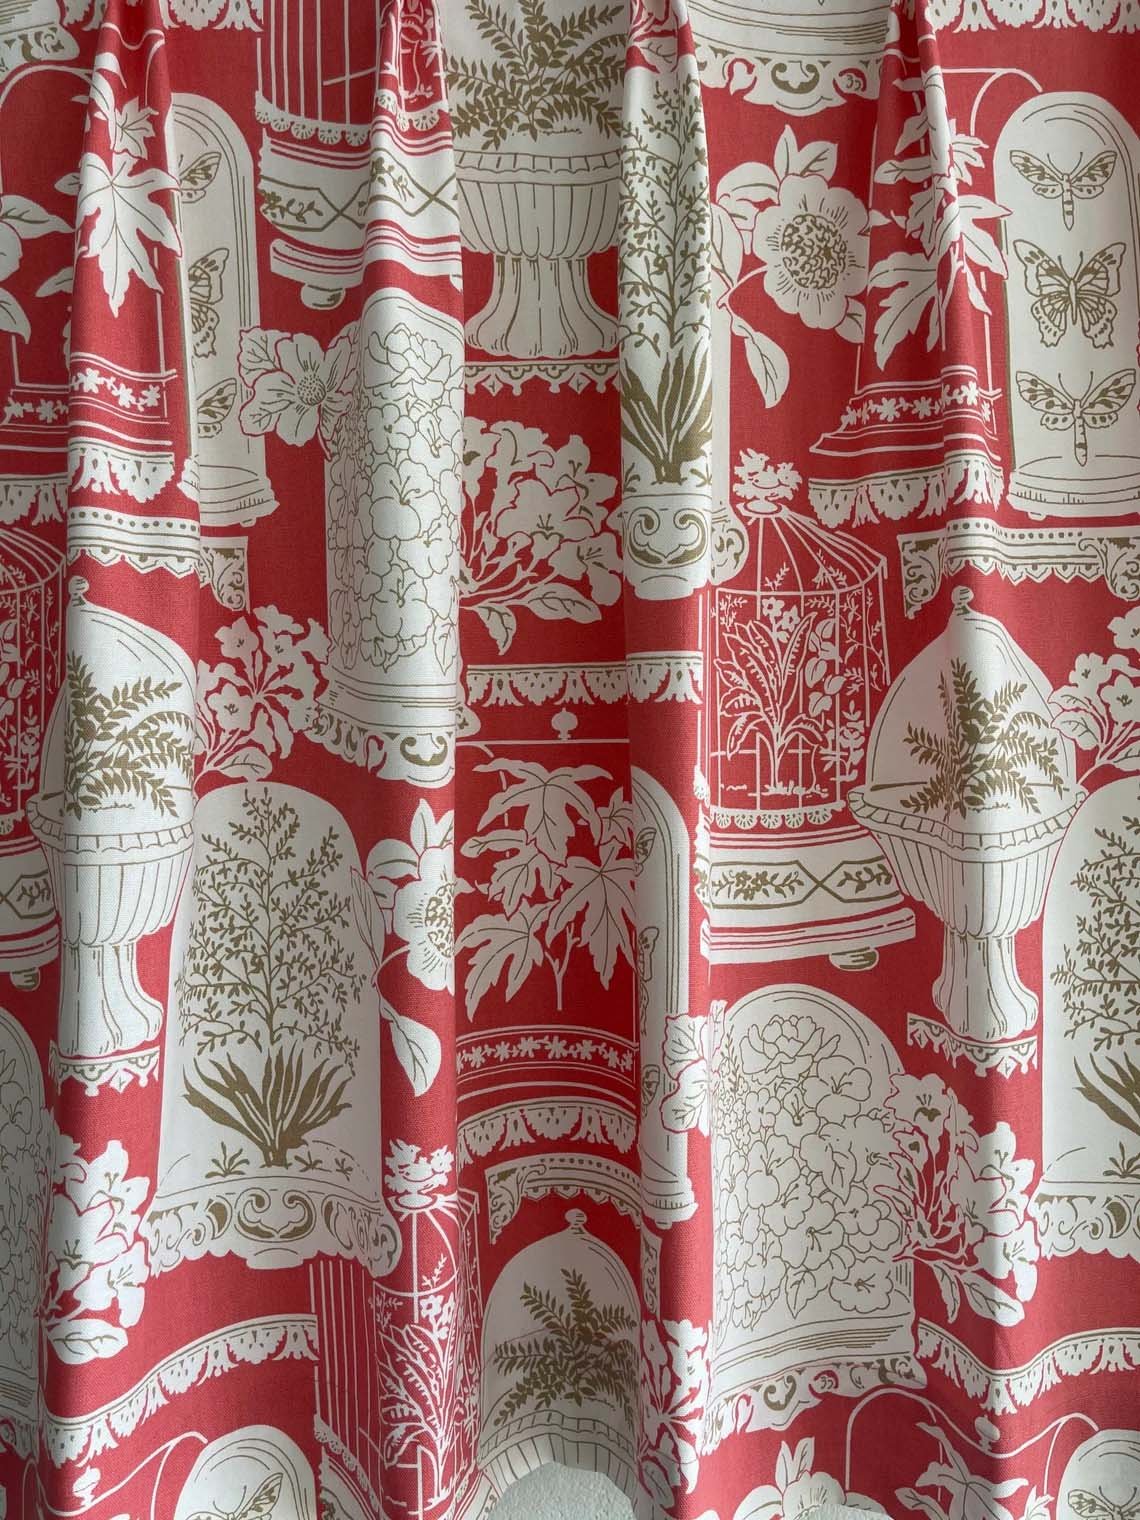 Designer Fabric Lee Jofa Coral pink print floral toile jar fern butterfly jar chinoiserie Curtain Panel designer fabric Window treatment